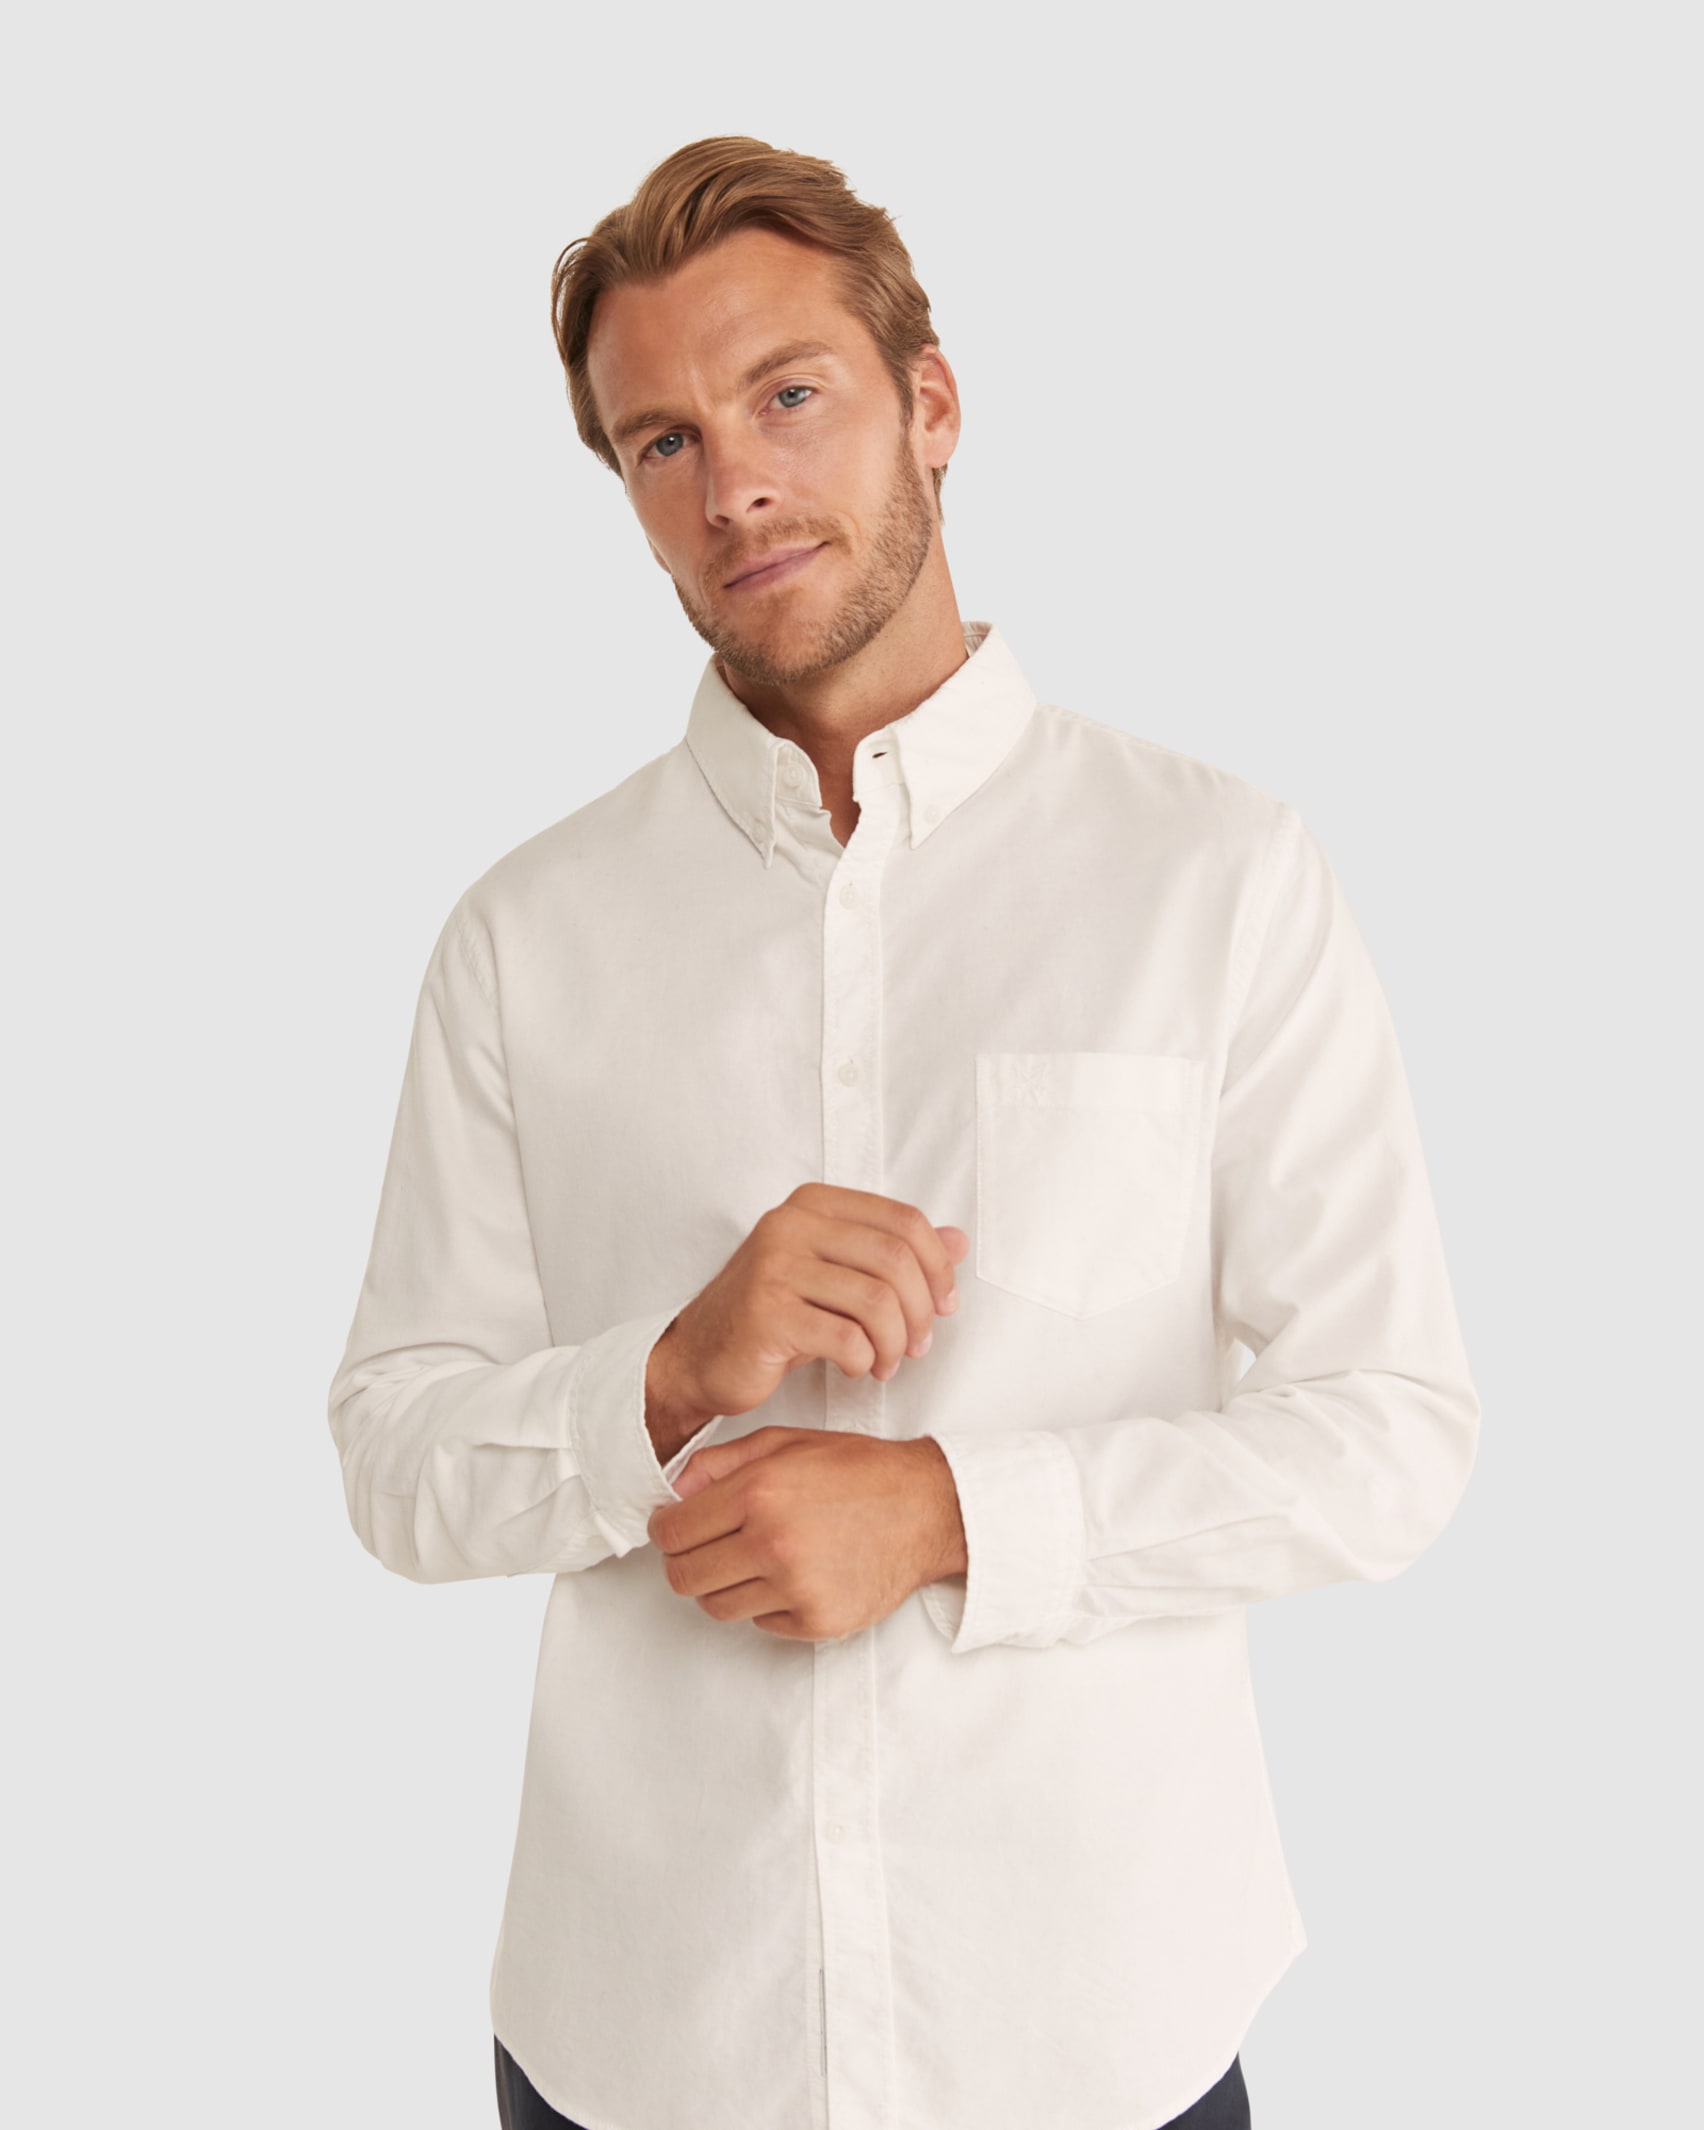 Cotton Long Sleeve Shirt in WHITE